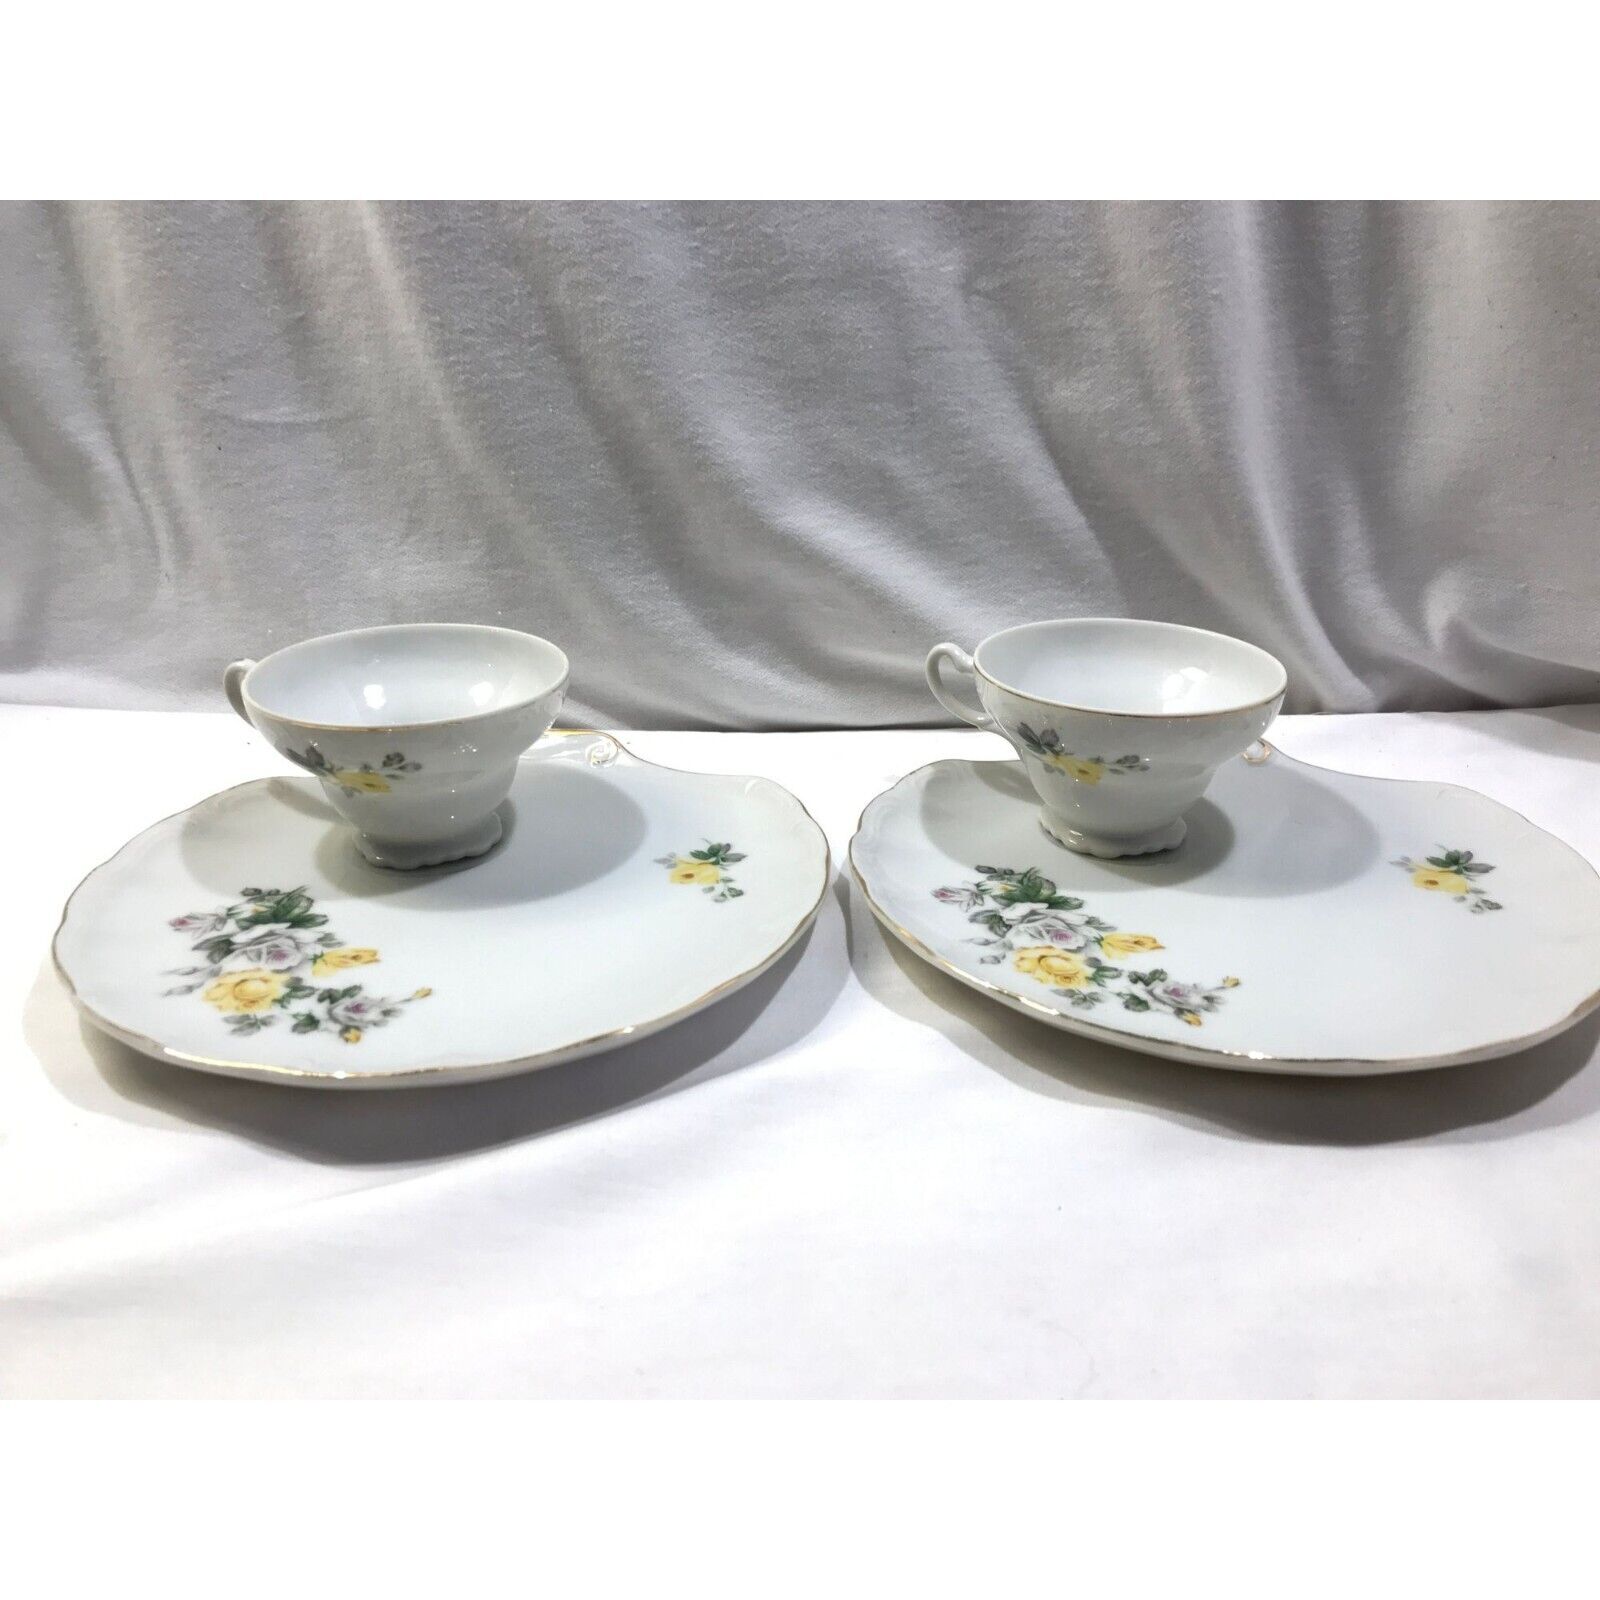 Yellow rose porcelain snack tea set, vintage china snack plate and cup